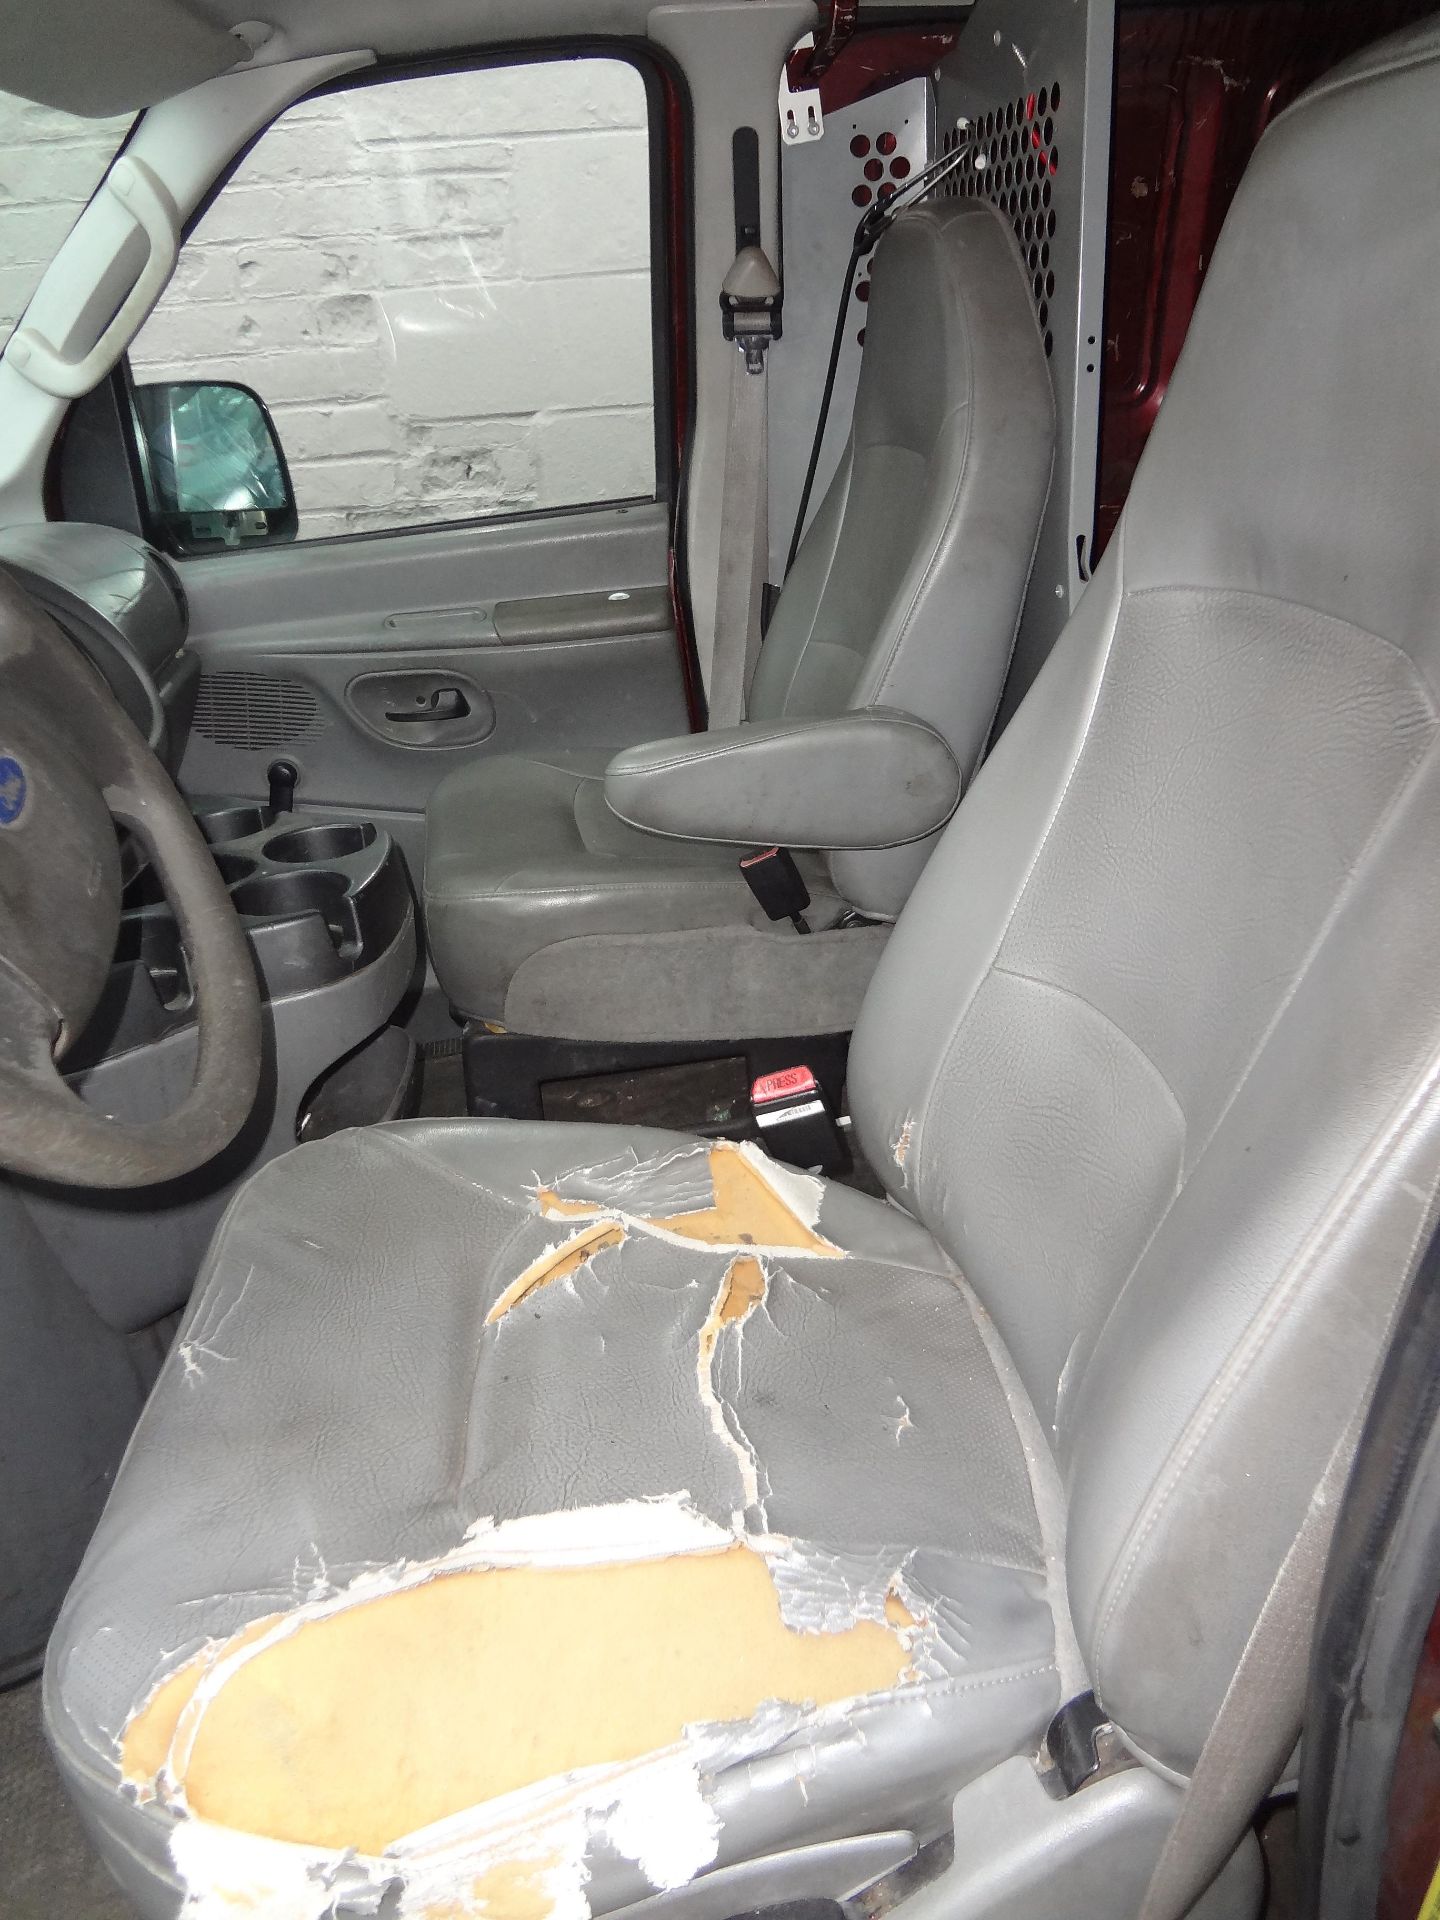 2006 FORD E-250 WORK VAN, APPROXIMATELY 148,000 MILES - Image 9 of 17